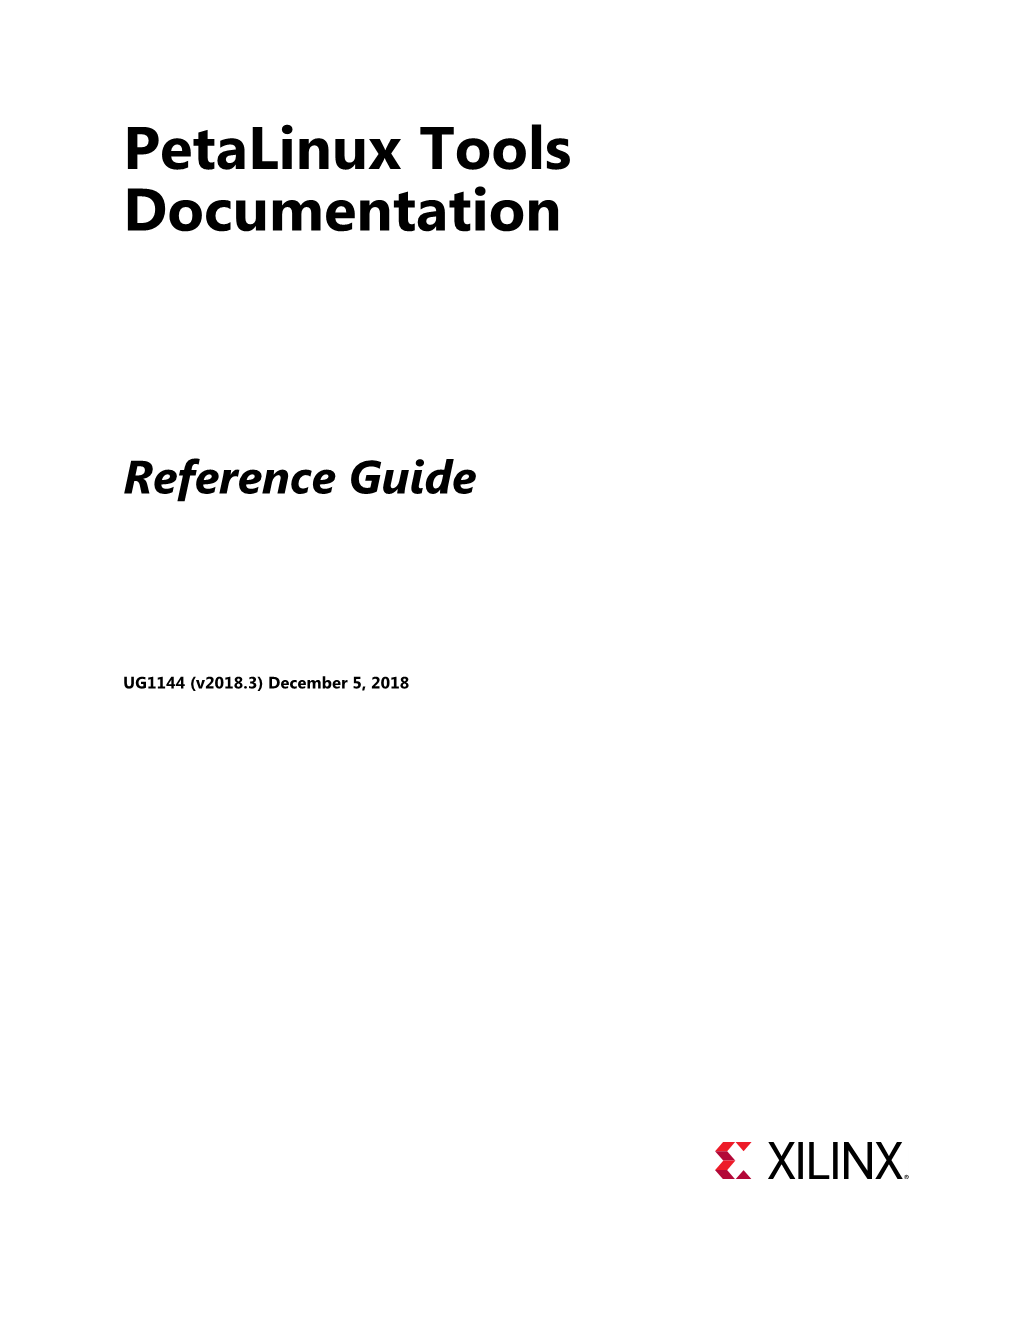 Petalinux Tools Documentation: Reference Guide